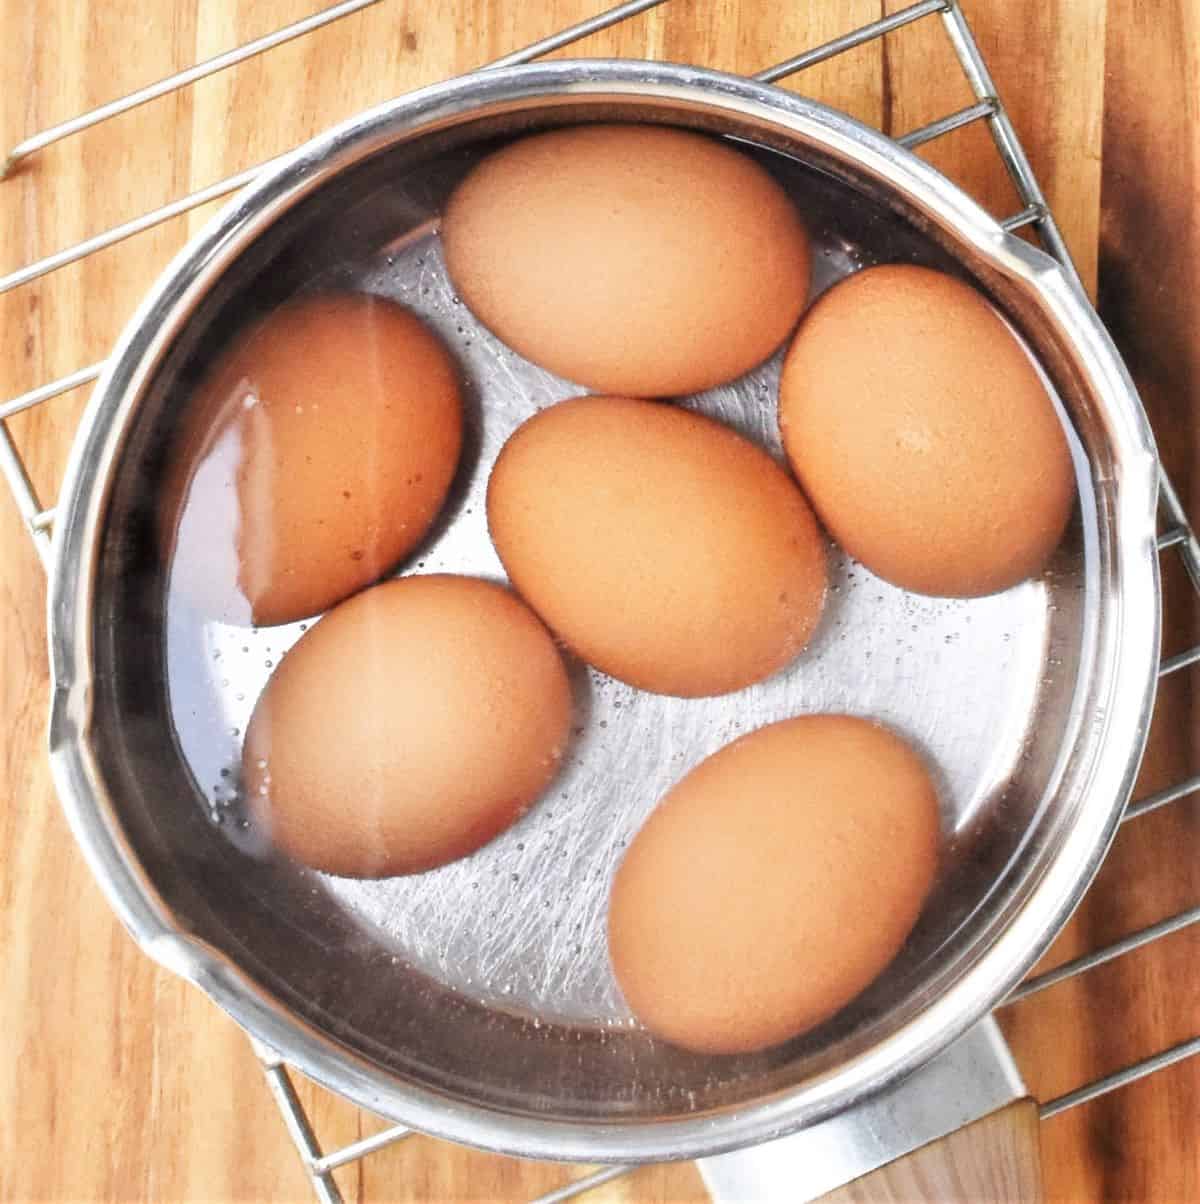 6 eggs in saucepan with water.